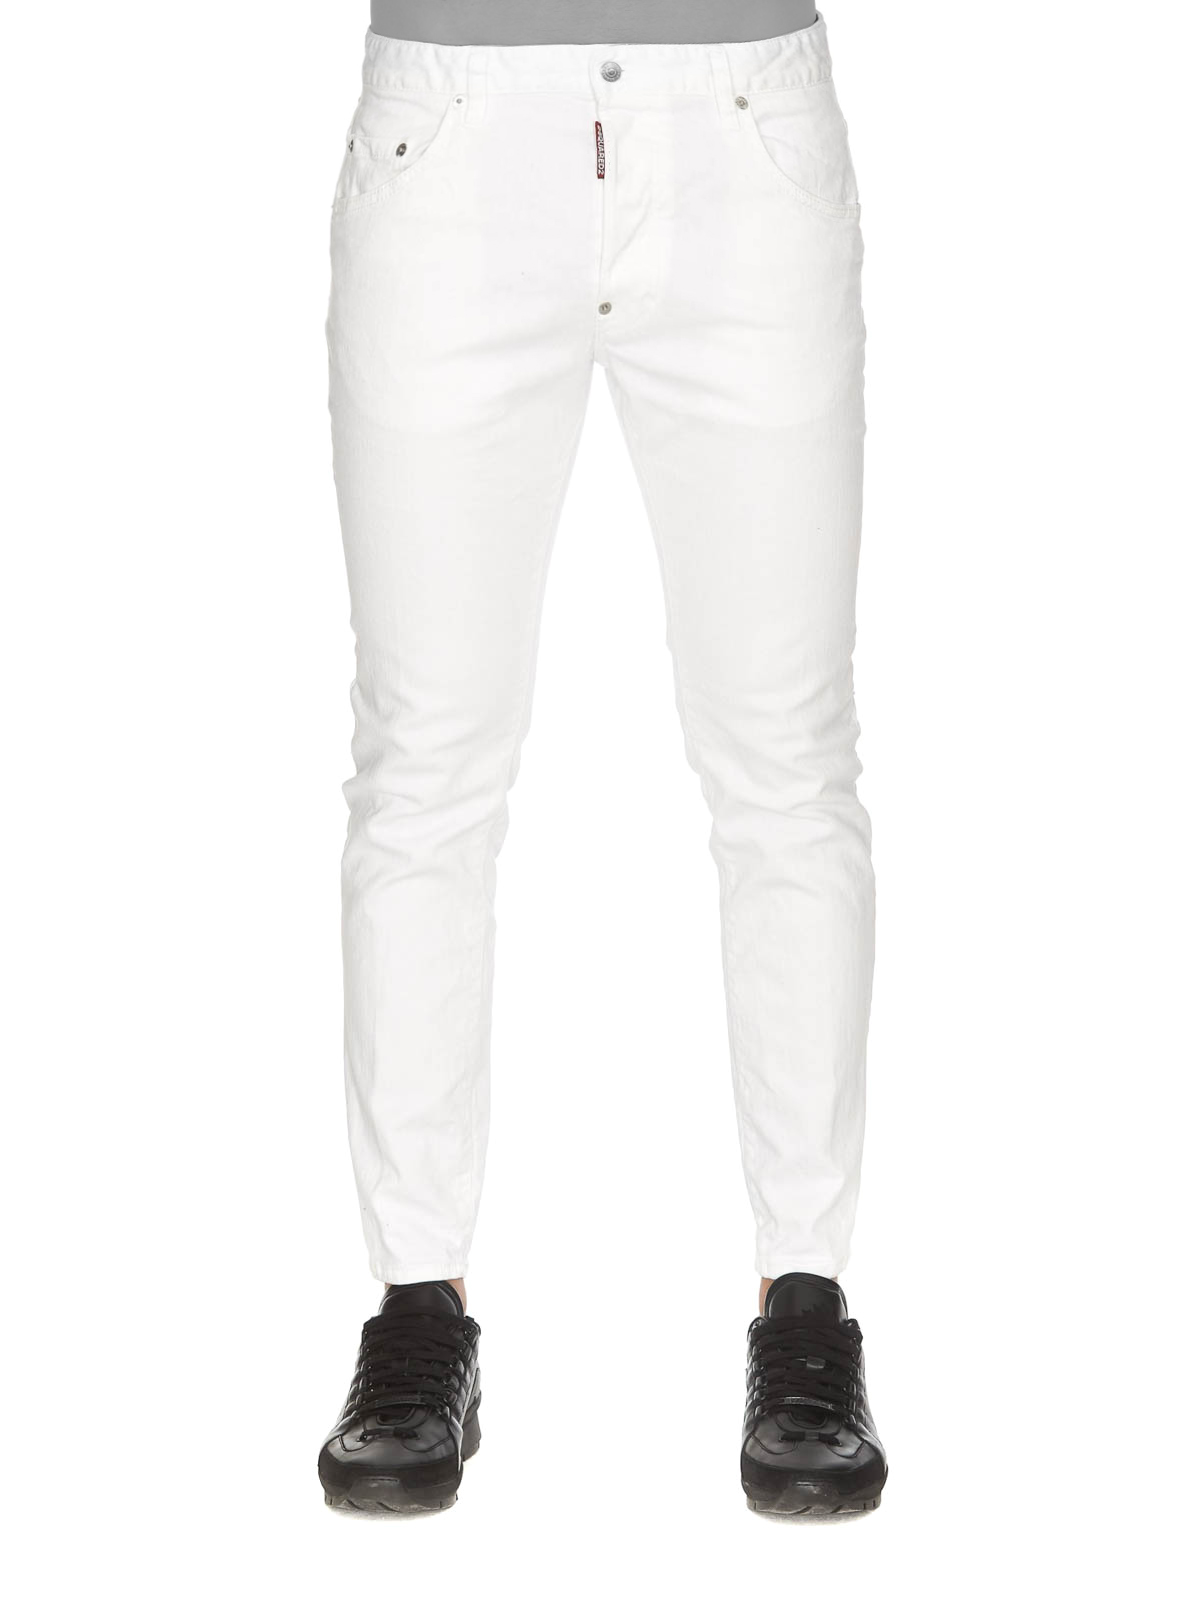 dsquared jeans white